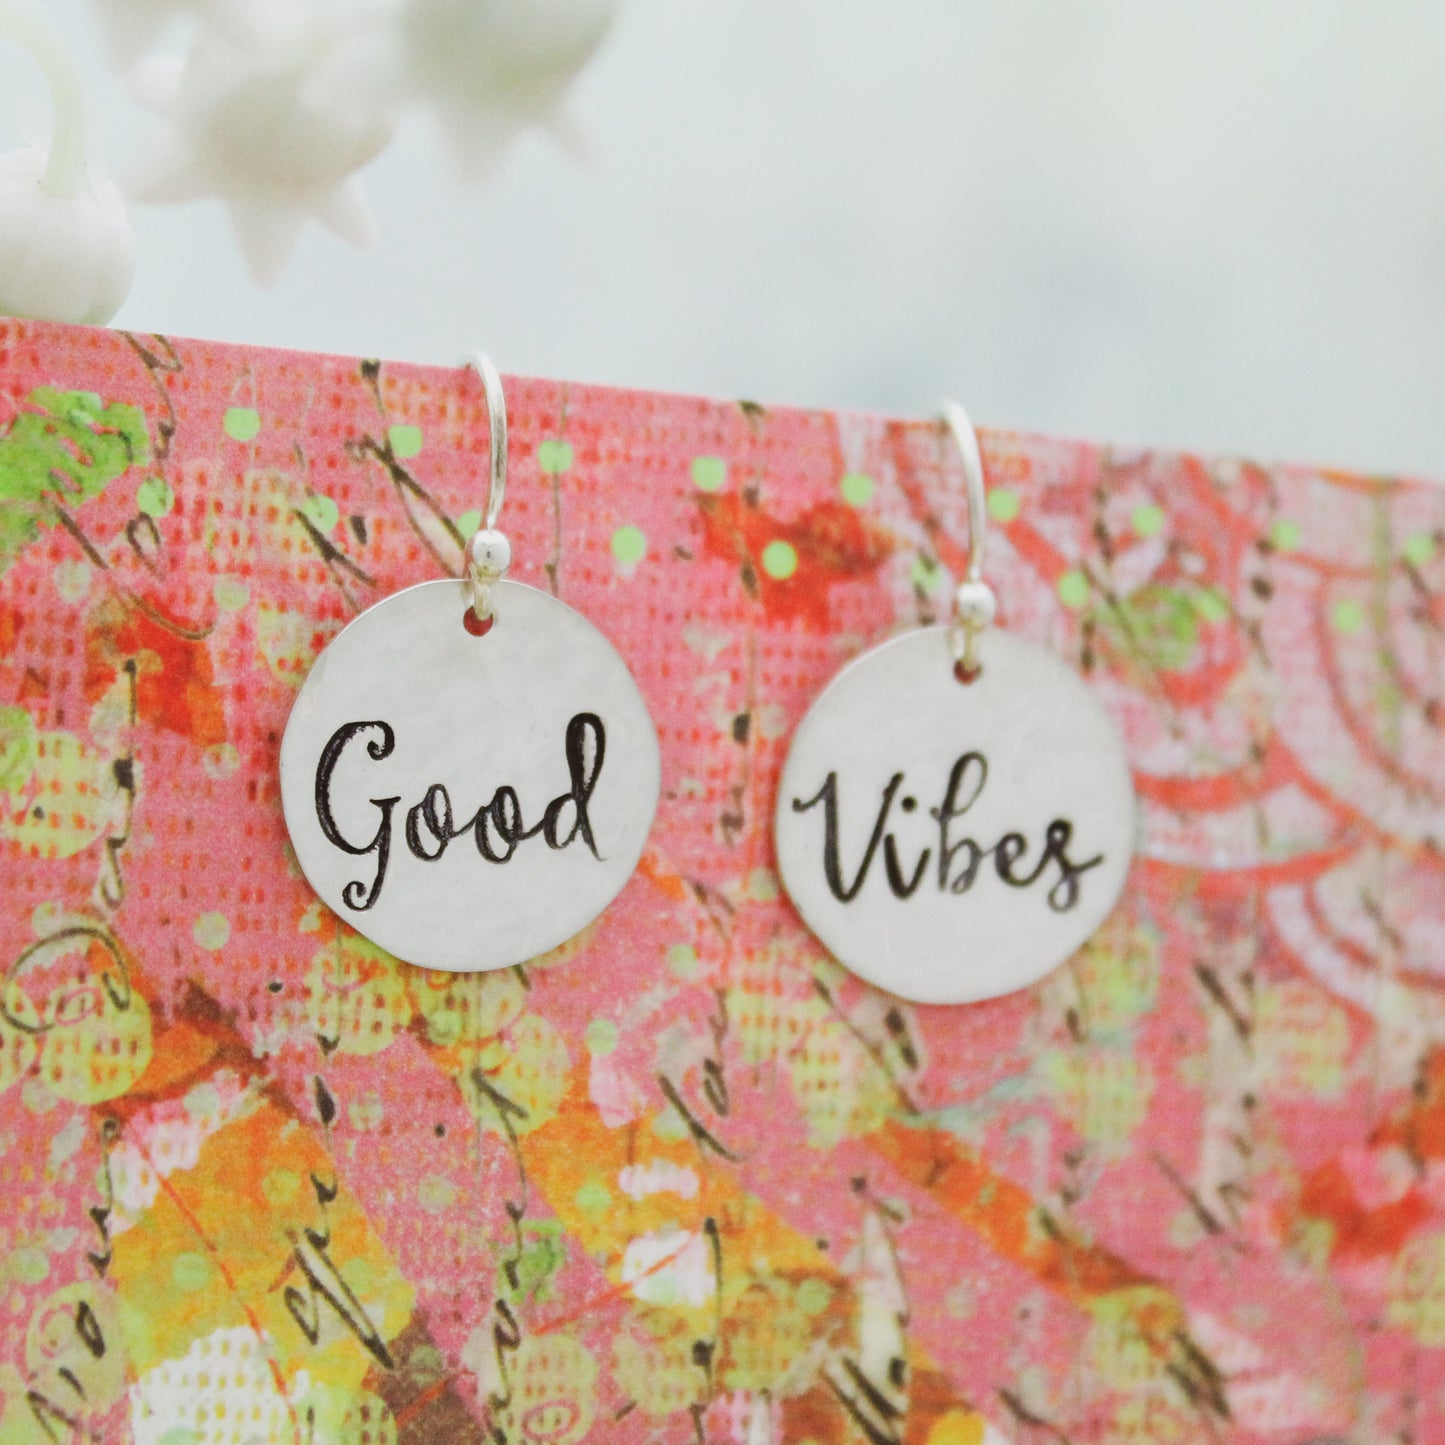 Good Vibes Earrings in Sterling Silver, Motivational Inspirational Jewelry, Gifts for Her, Good Vibes Jewelry, Good Vibes Gift for Her